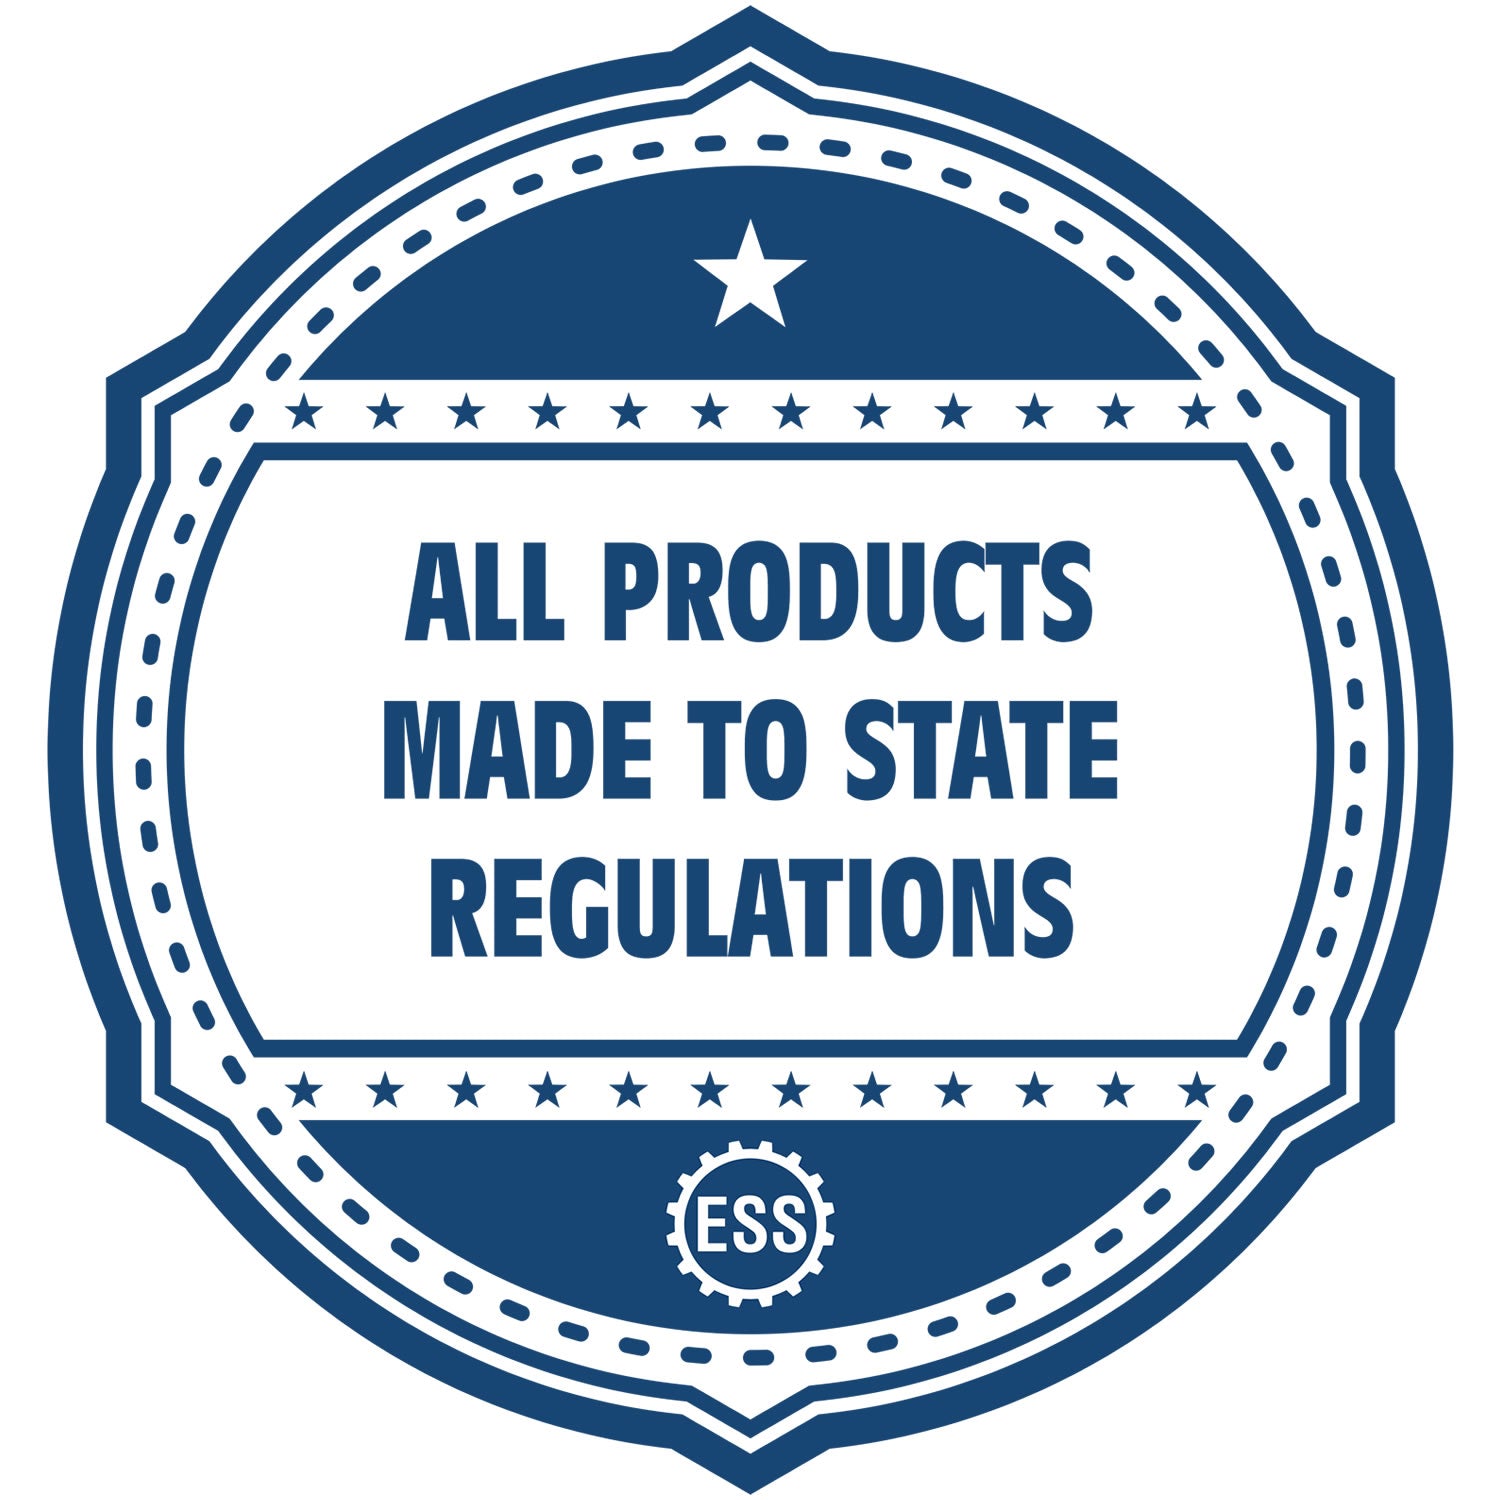 An icon or badge element for the Kentucky Long Reach Landscape Architect Embossing Stamp showing that this product is made in compliance with state regulations.